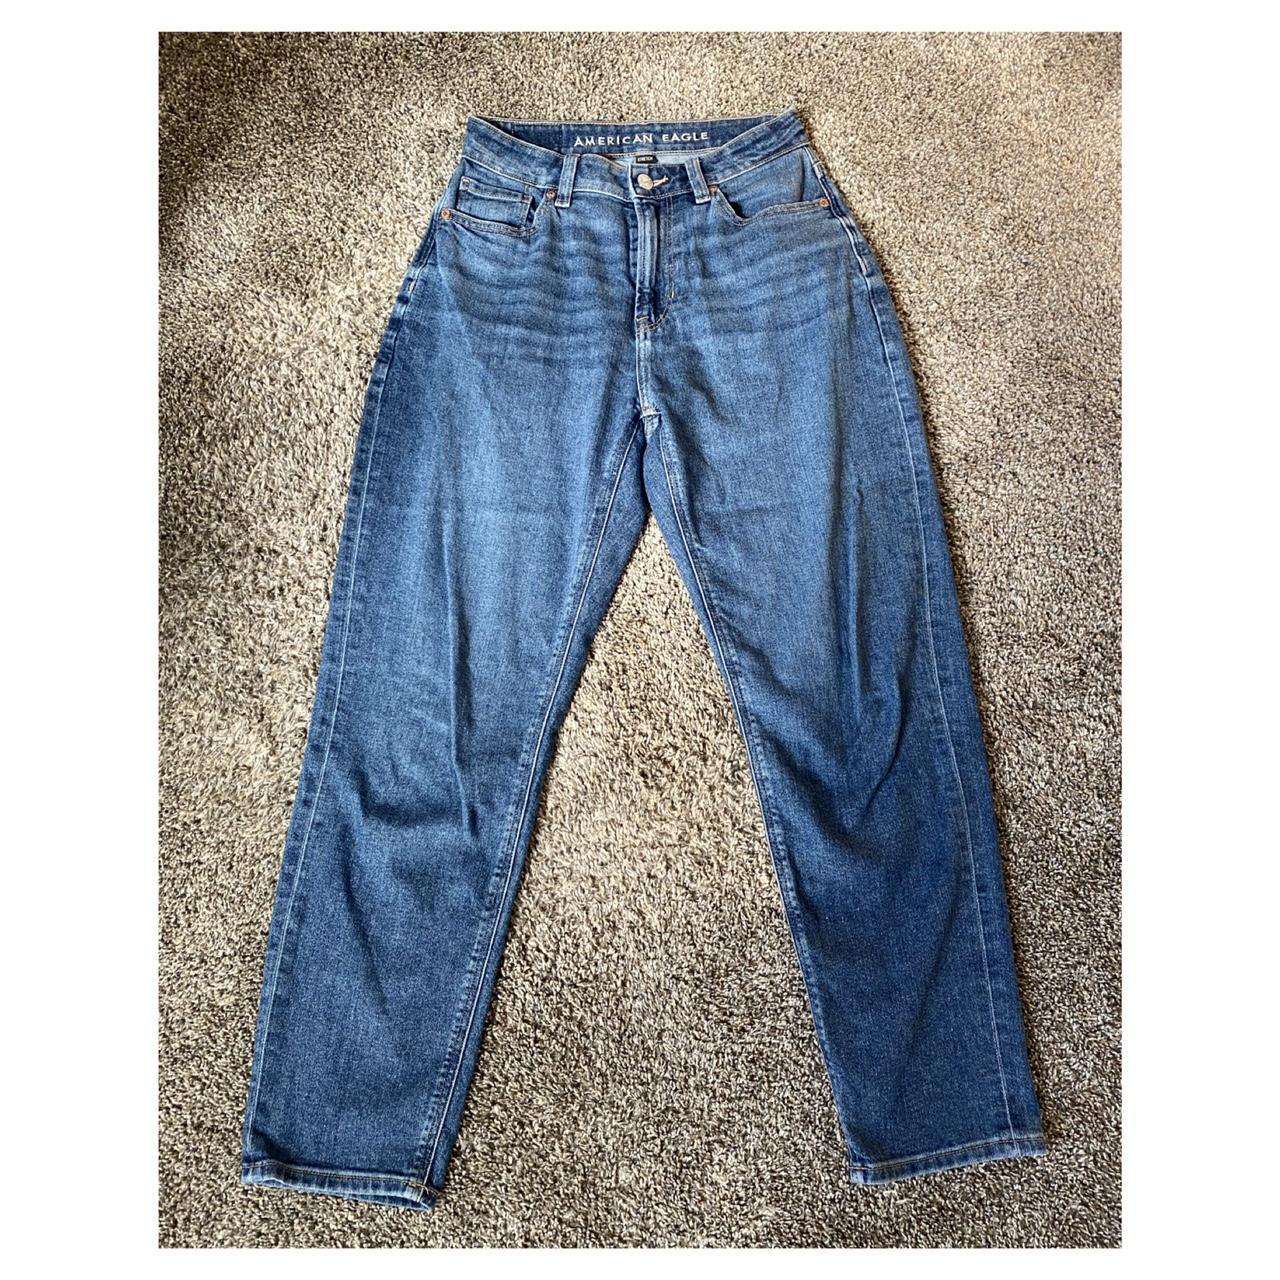 super soft, stretchy, and comfy jeans from american... - Depop